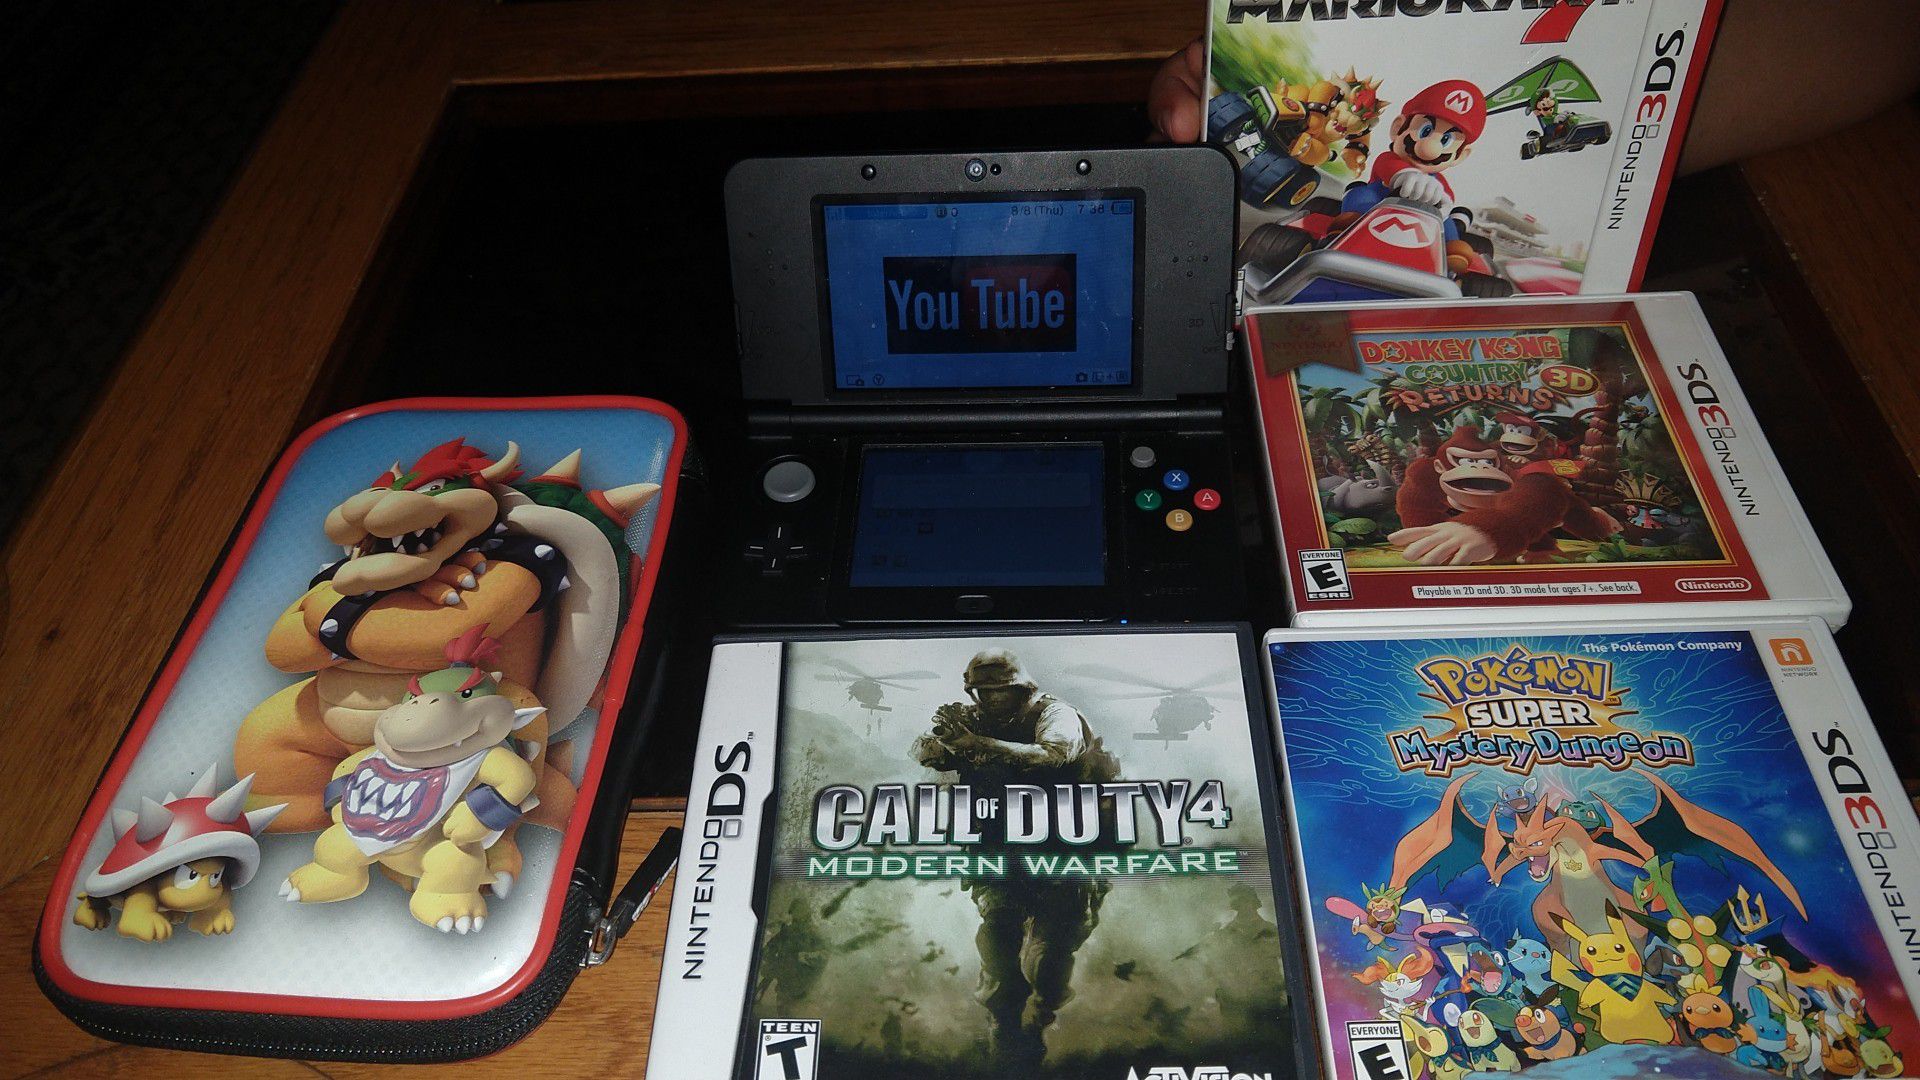 Nintendo 3DS with call of duty 4 Pokemon super mystery dragon 3DS game donkey Kong country returns 3D Mario kart 7 and Bowser case